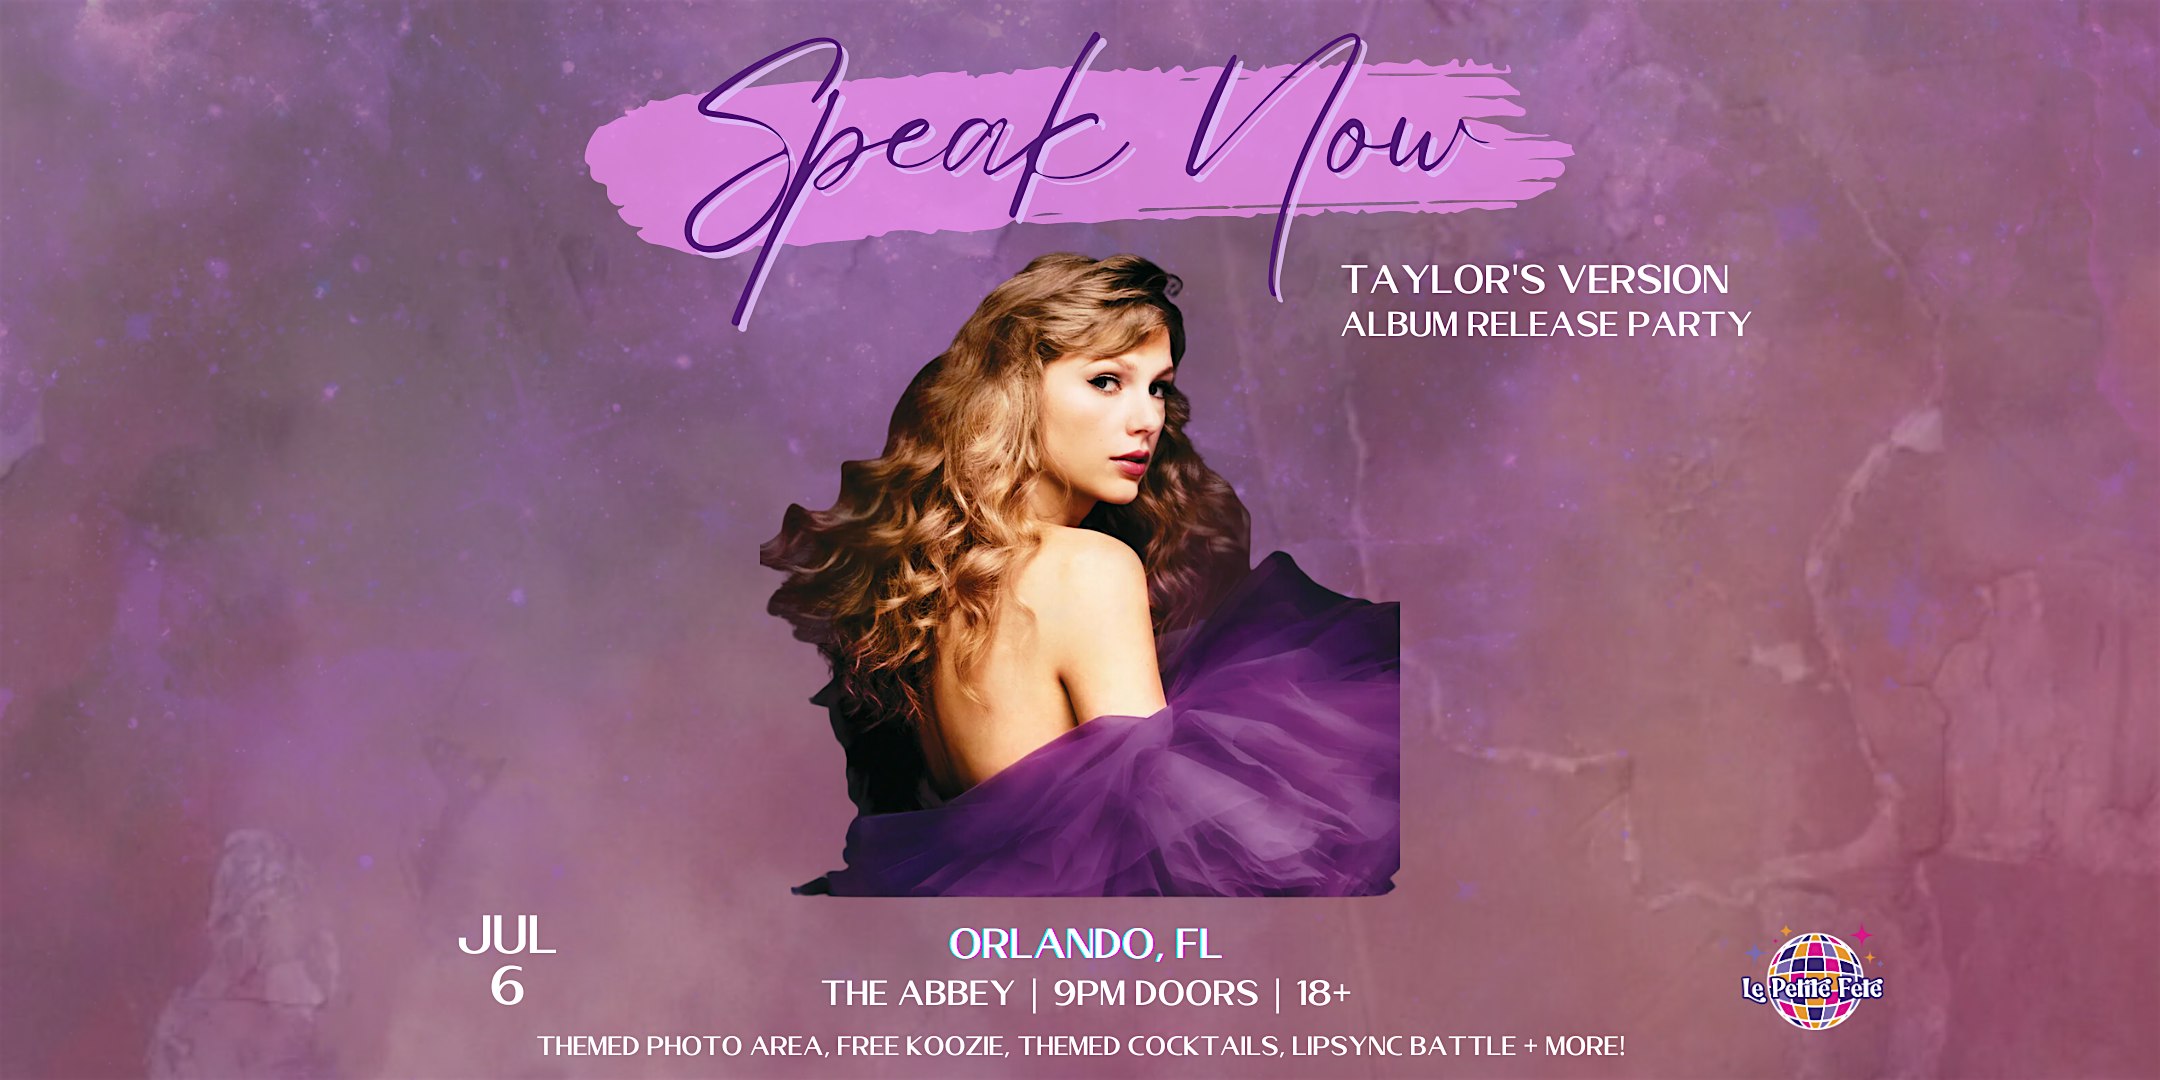 Speak Now: Taylor's Version Album Release Dance Party in Orlando at the Abbey